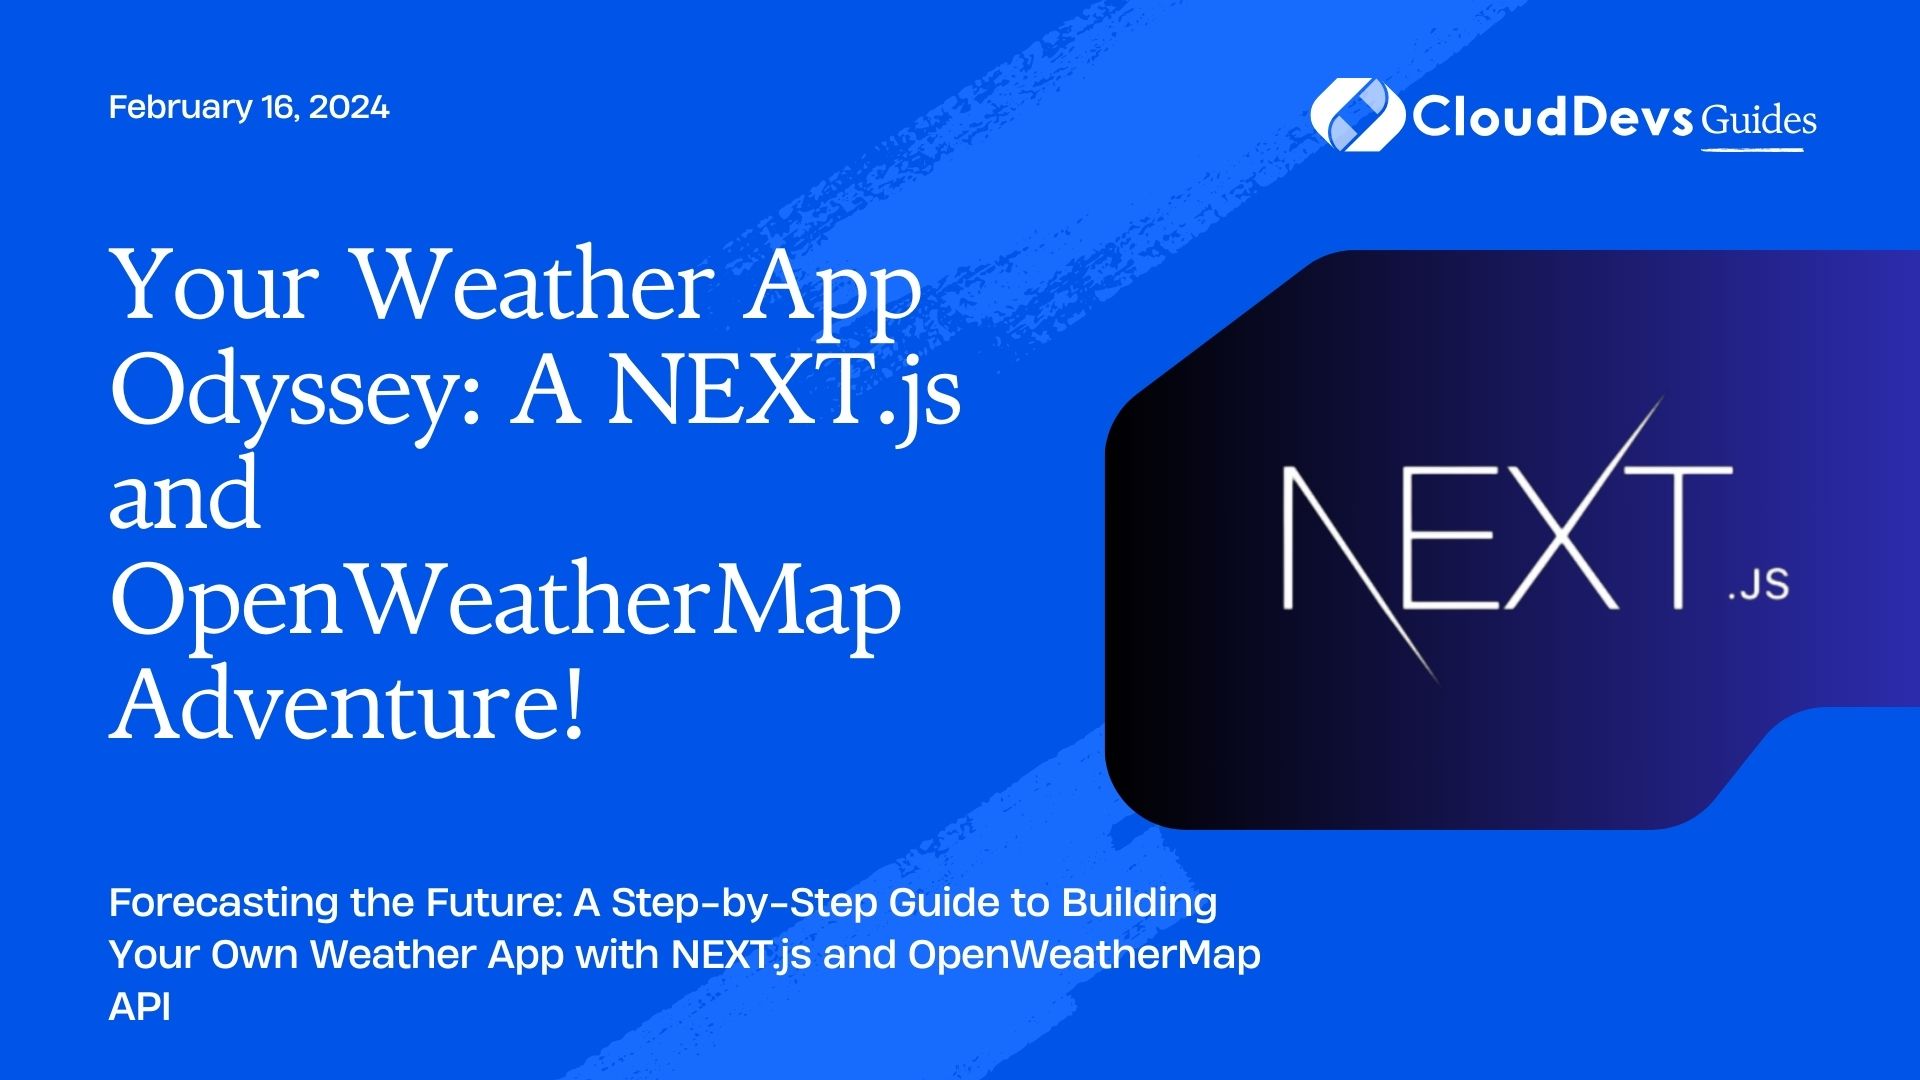 Your Weather App Odyssey: A NEXT.js and OpenWeatherMap Adventure!